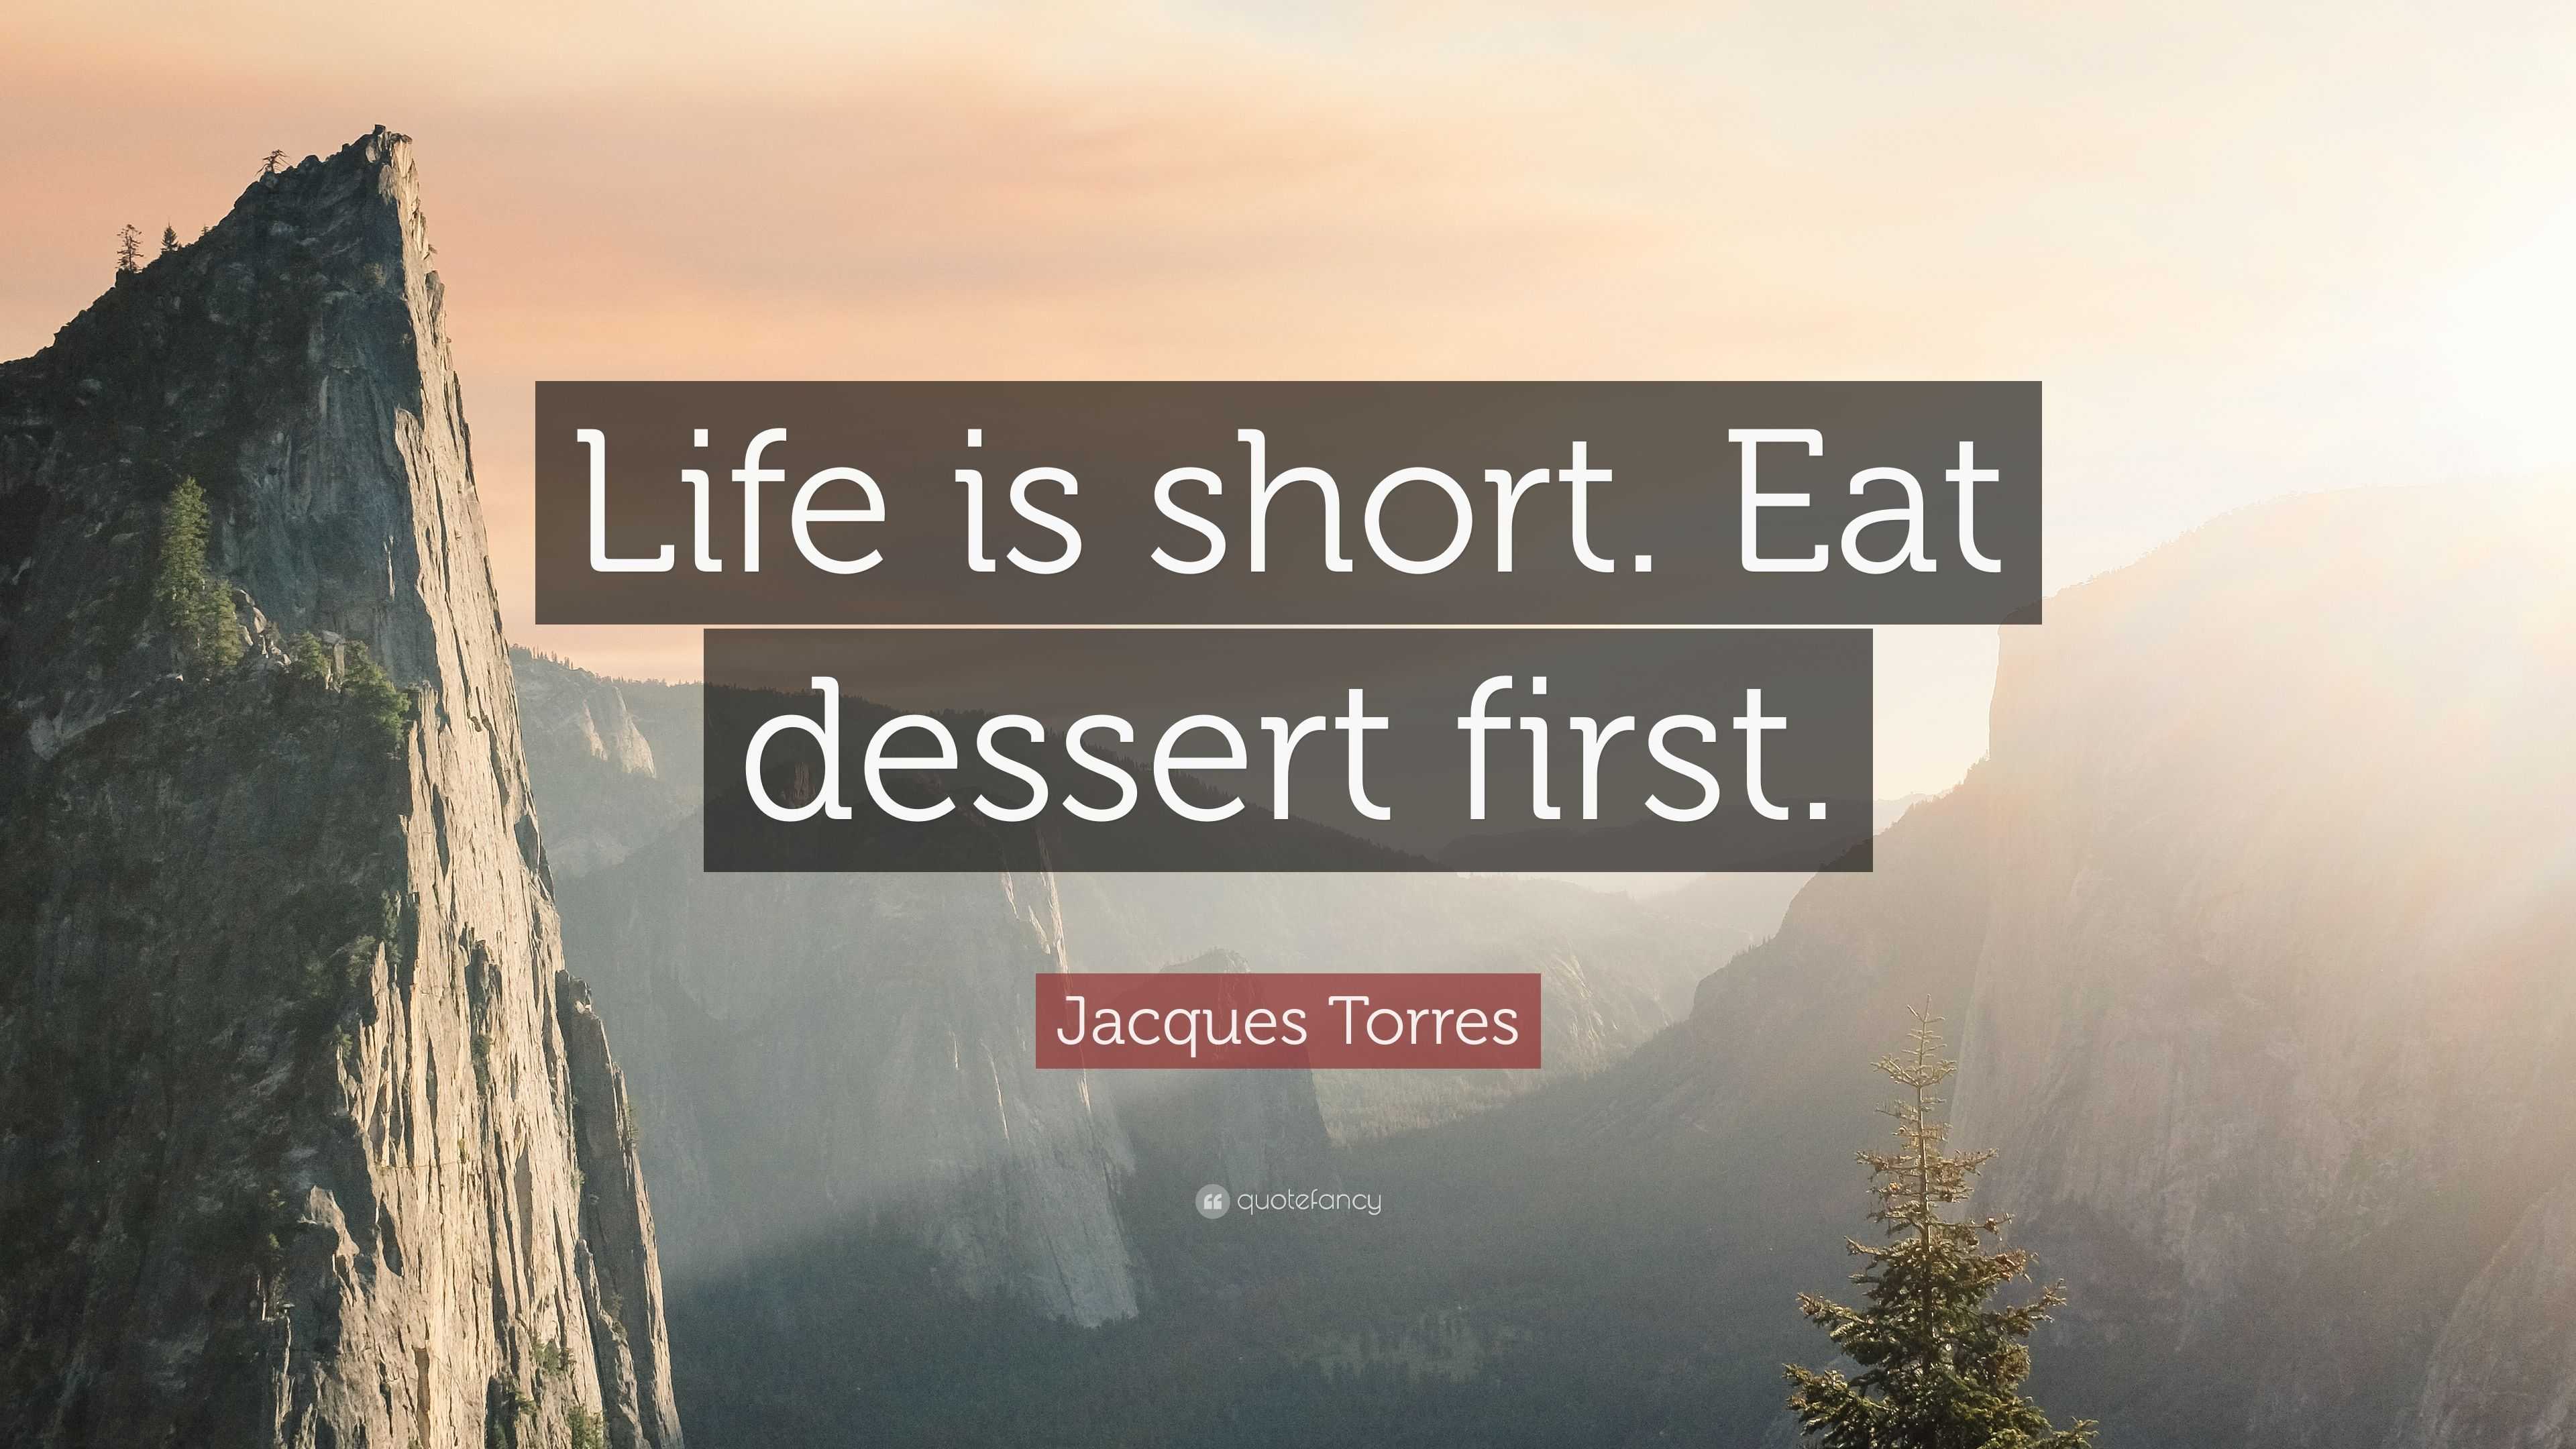 Torres Quote: “Life is short. Eat dessert first.”